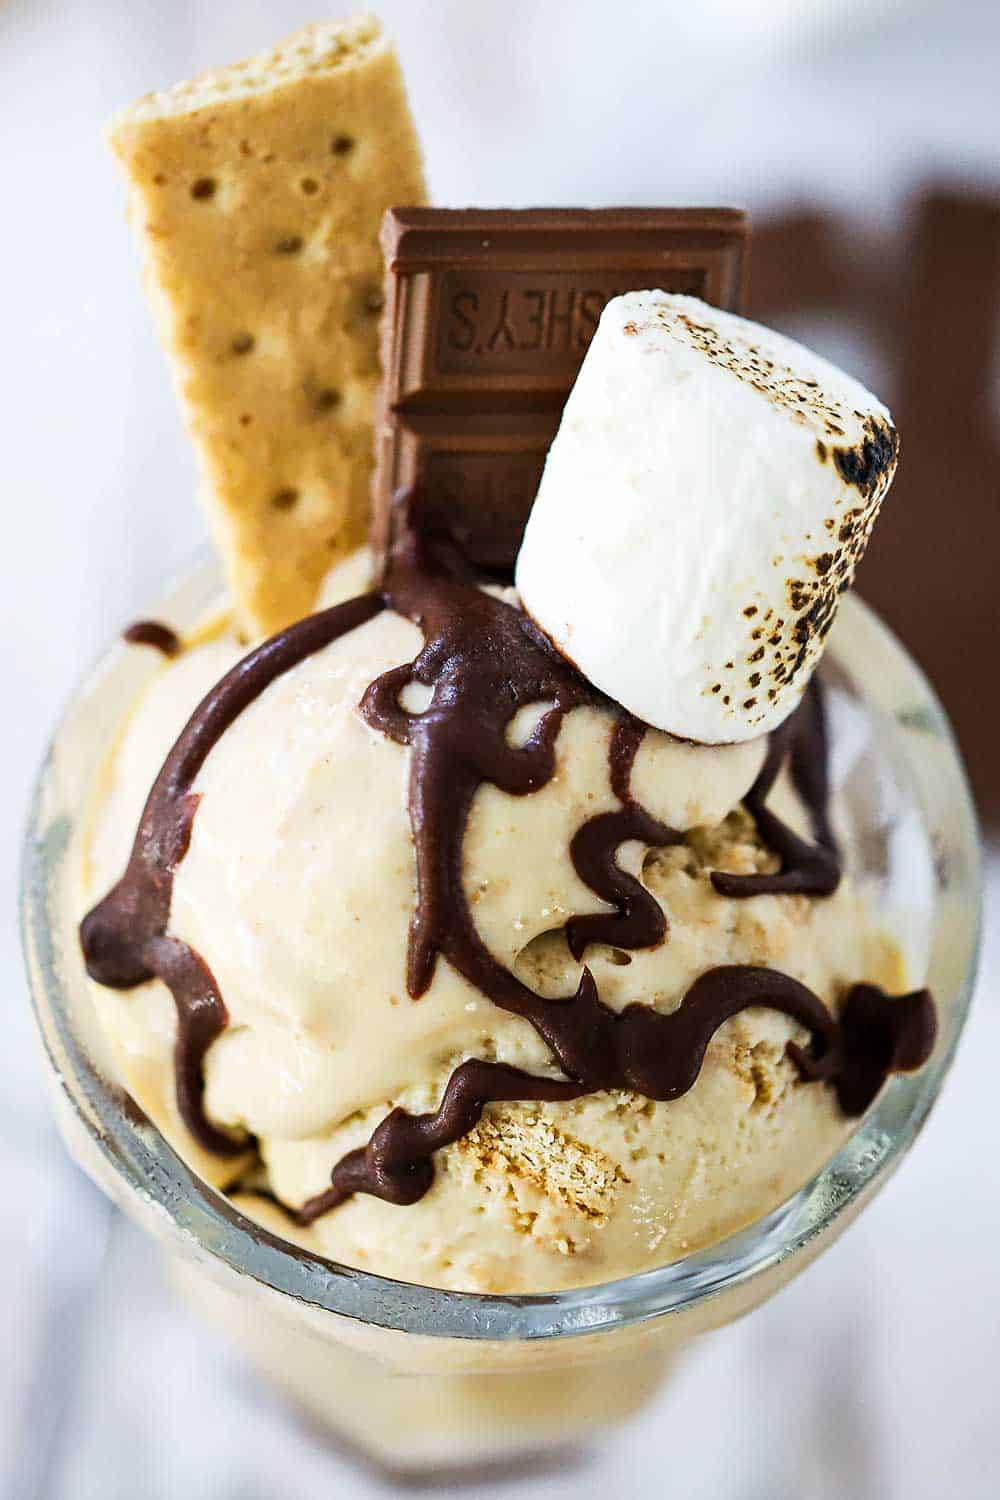 A glass vessel filled with s'more ice cream topped with a drizzle of chocolate sauce, graham crackers, chocolate candy, and a toasted marshmallow.